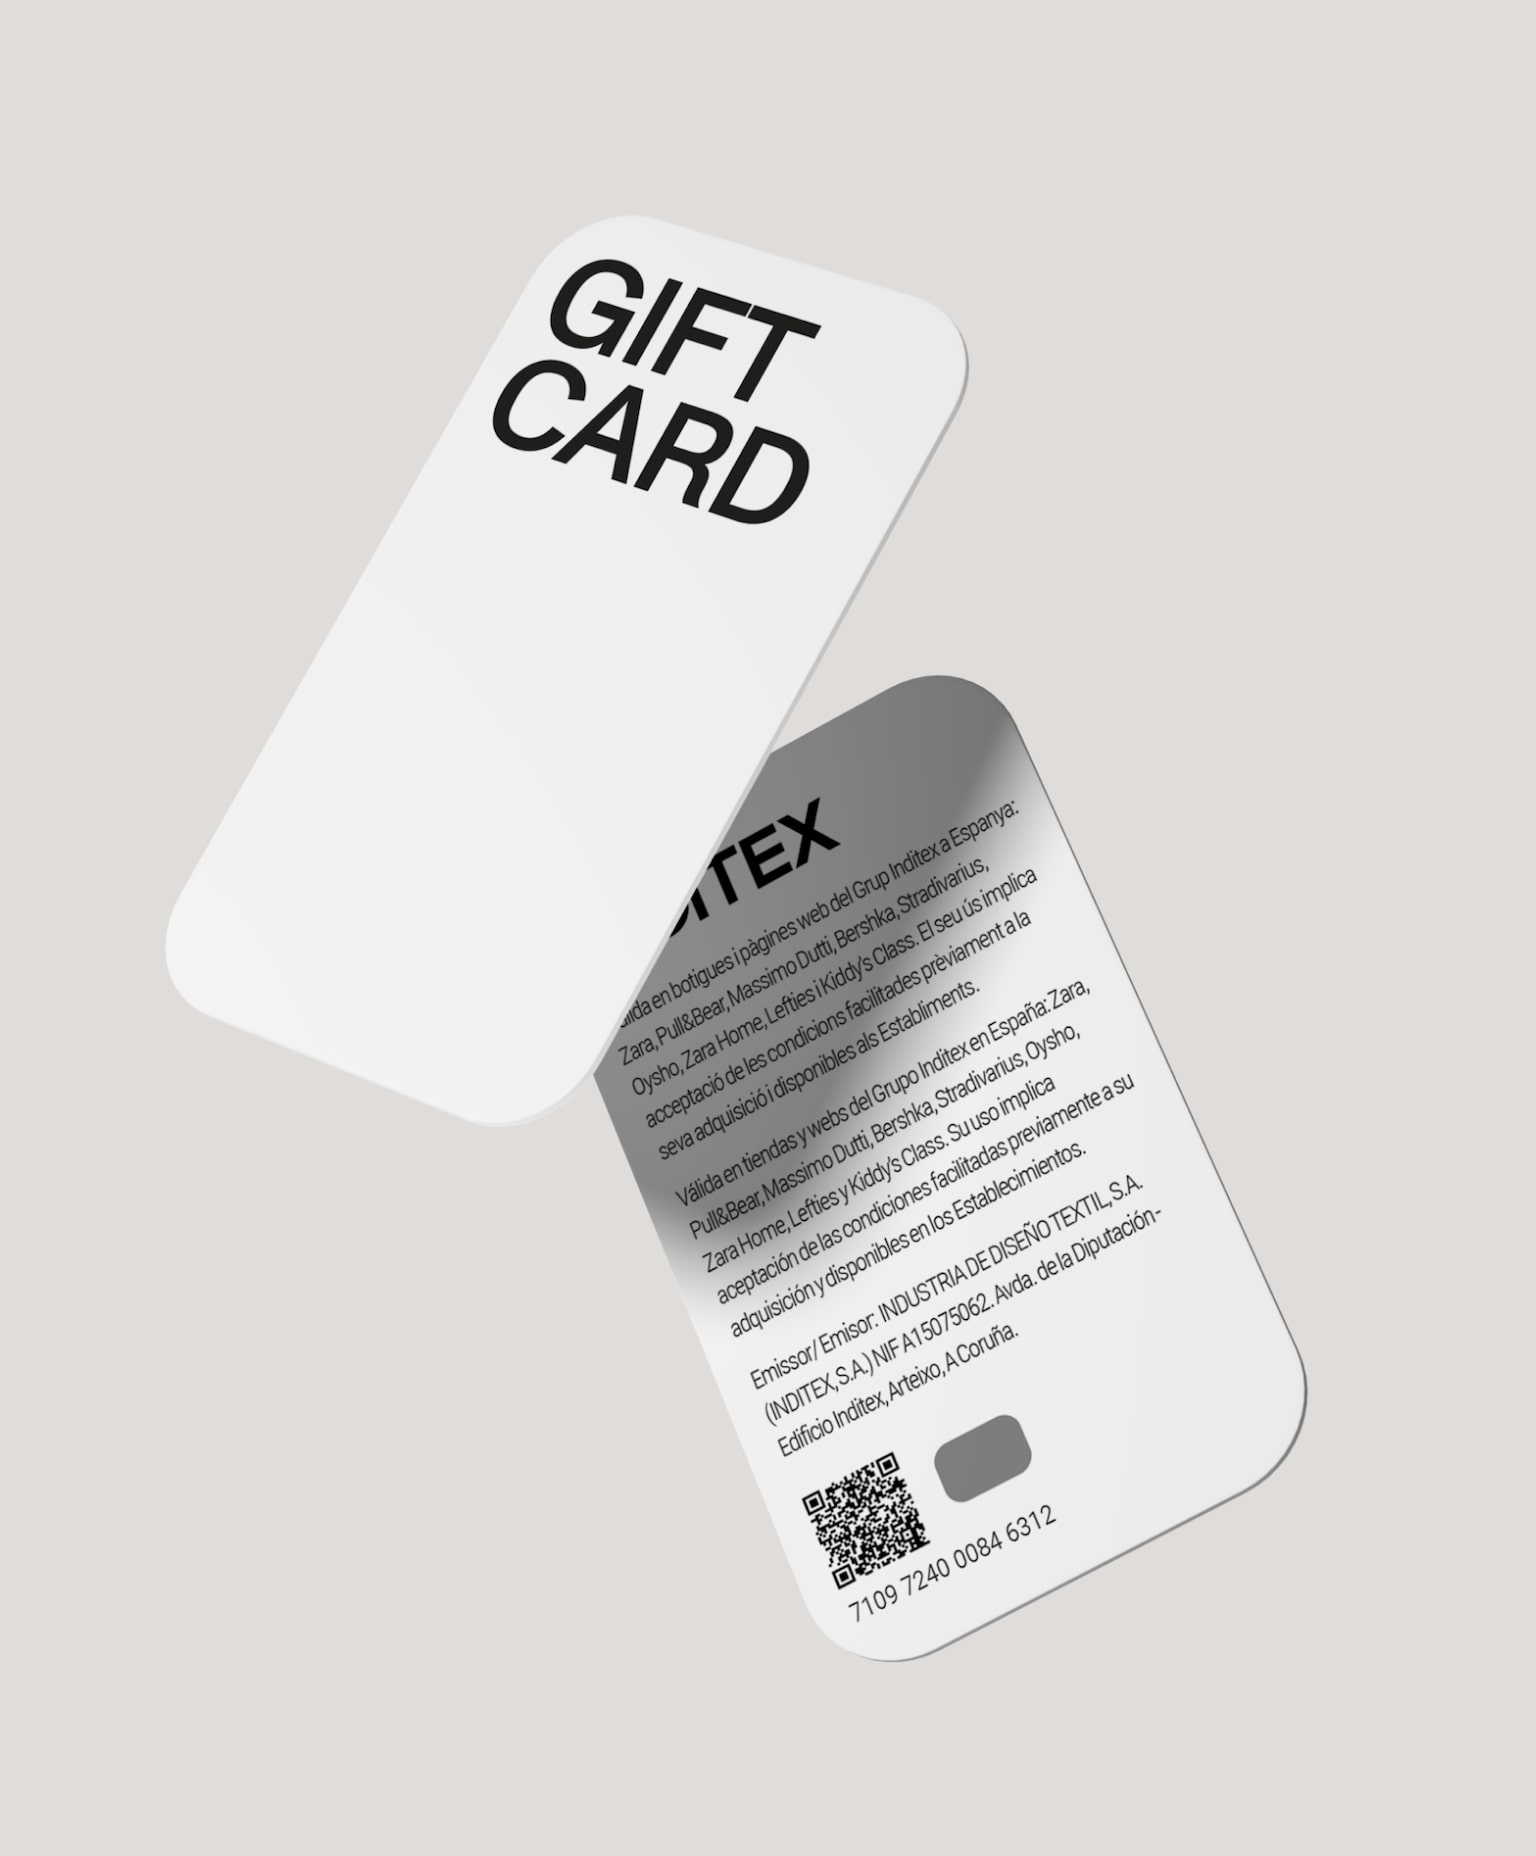 Physical gift card